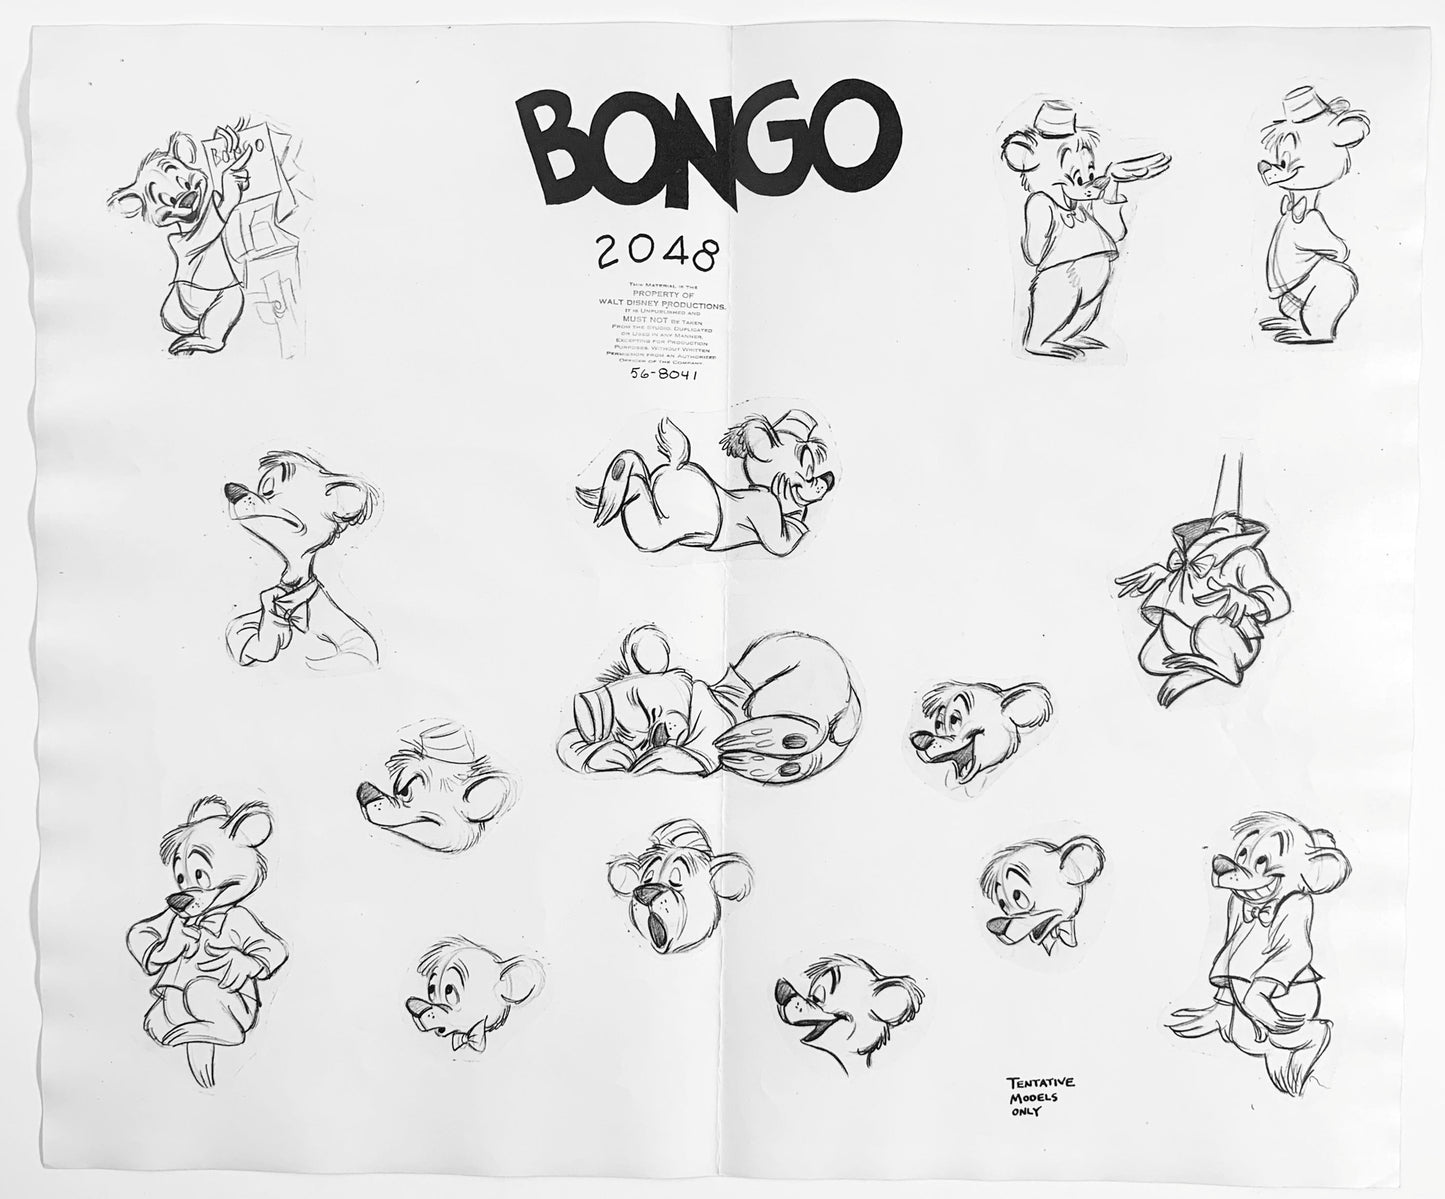 Bongo the Bear from Fun and Fancy Free by Walt Disney Productions and Animation Model Sheet from 1947 2